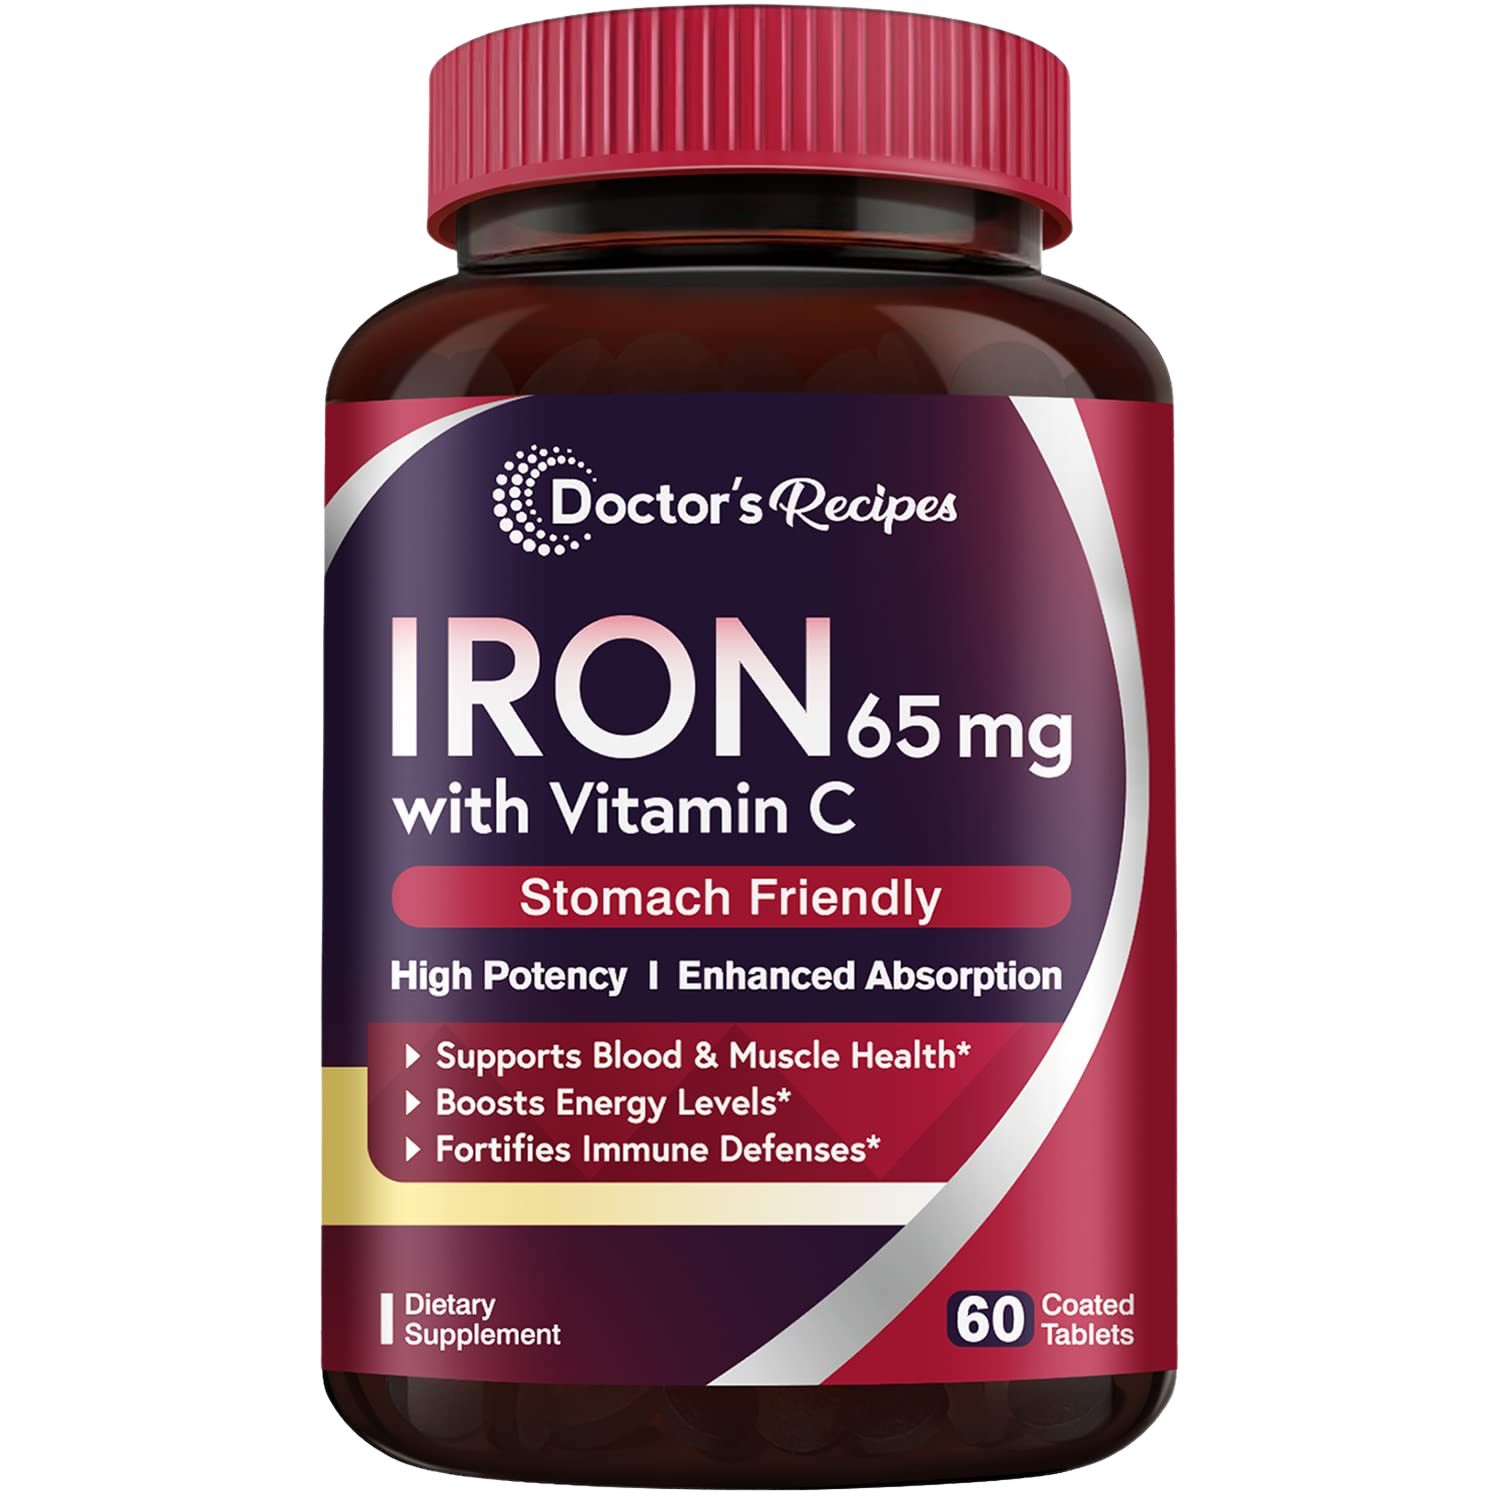 Doctor's Recipes Iron Supplement